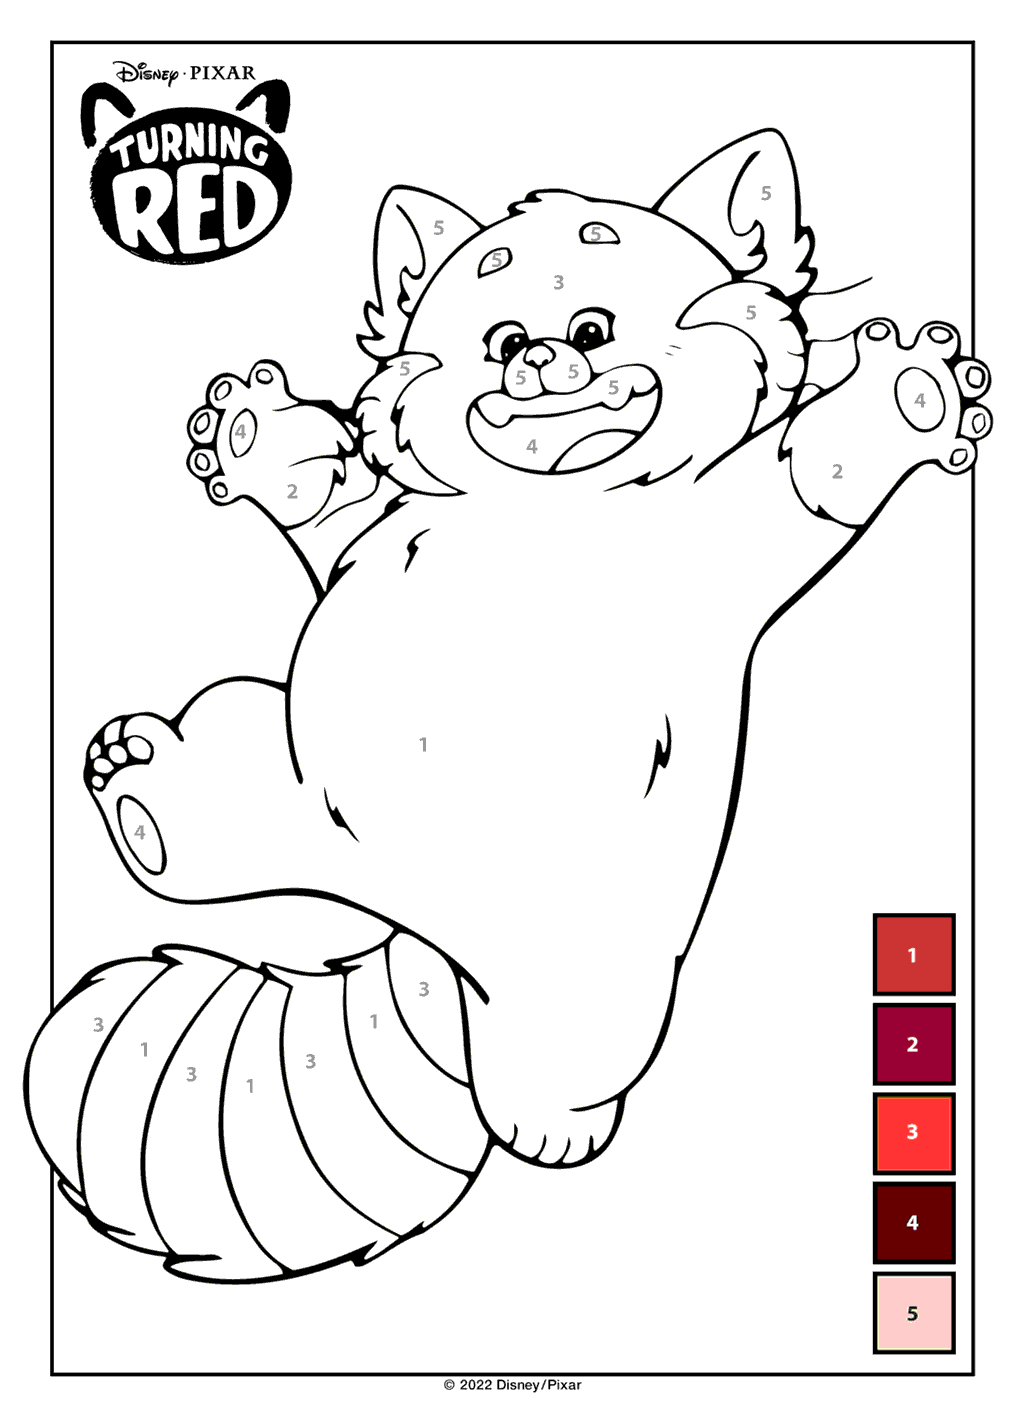 Red Panda from Turning Red coloring page